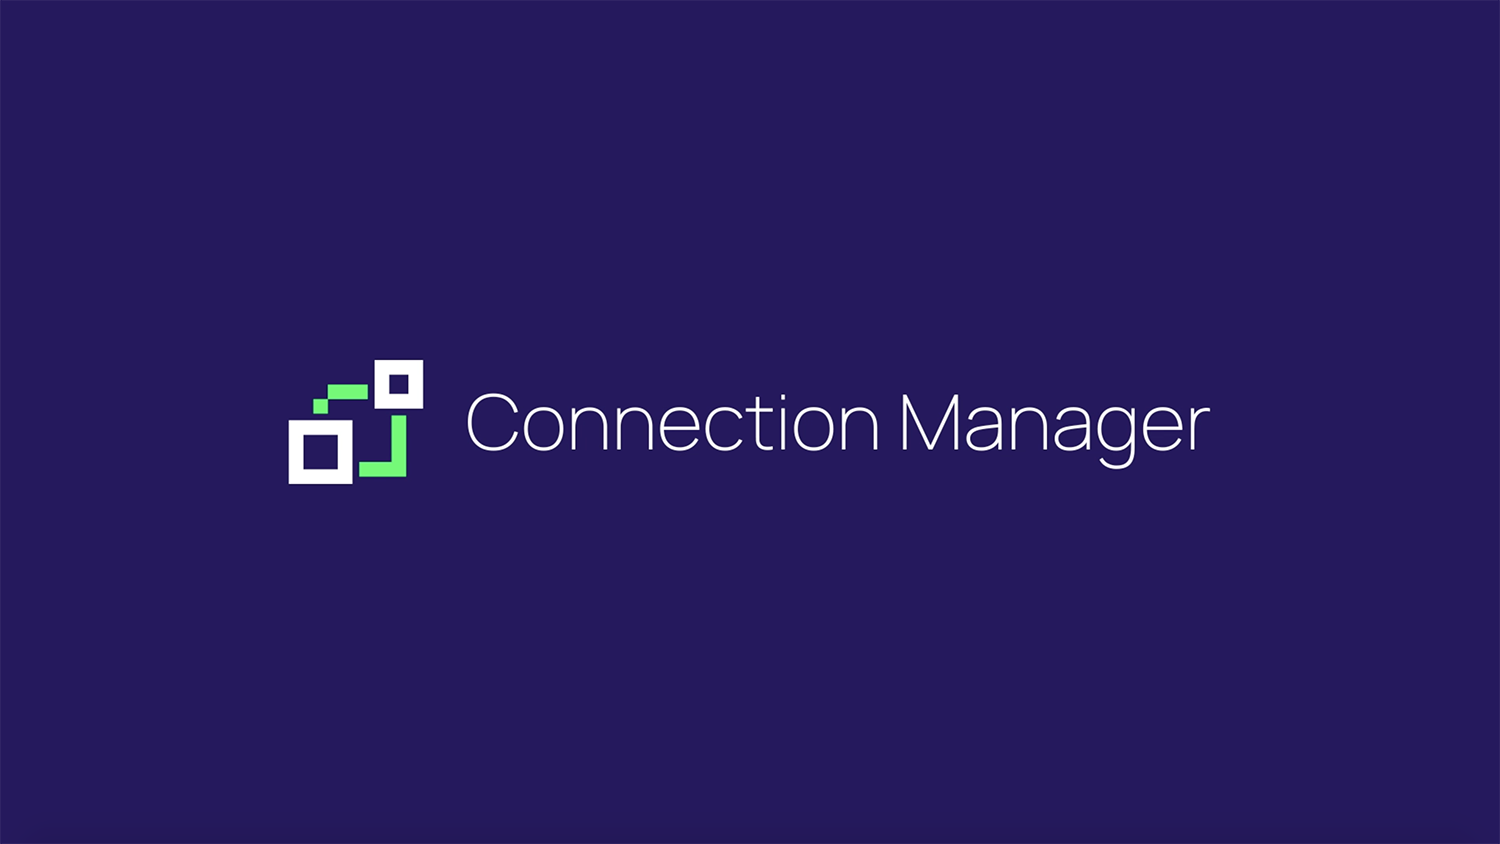 Connection Manager Demo